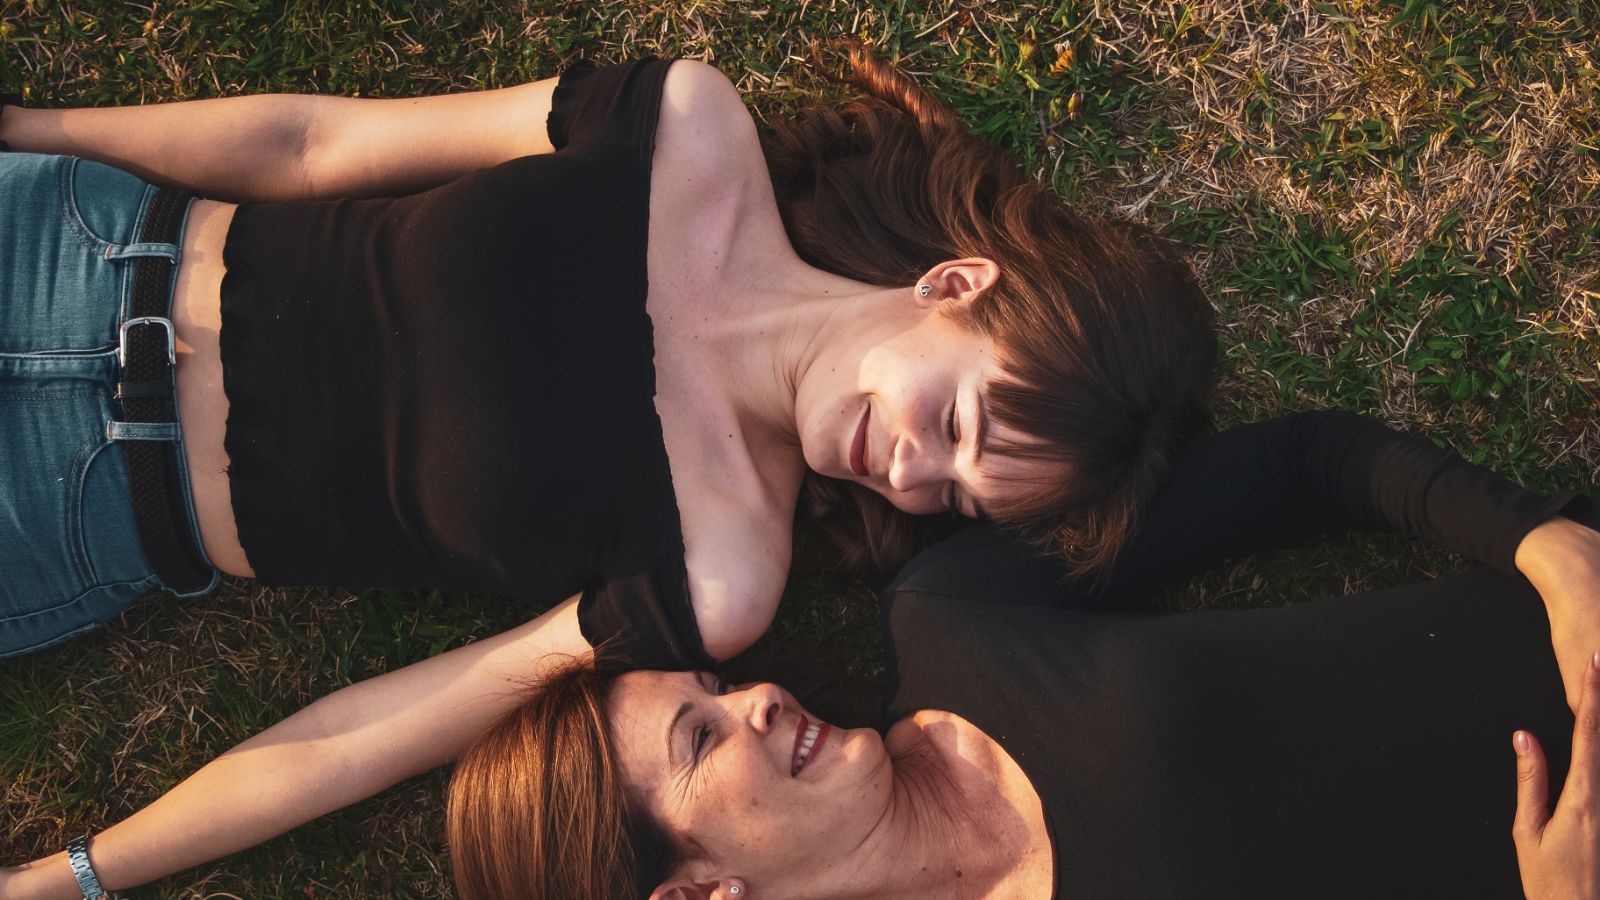 2 women lay on grass smiling and laughing